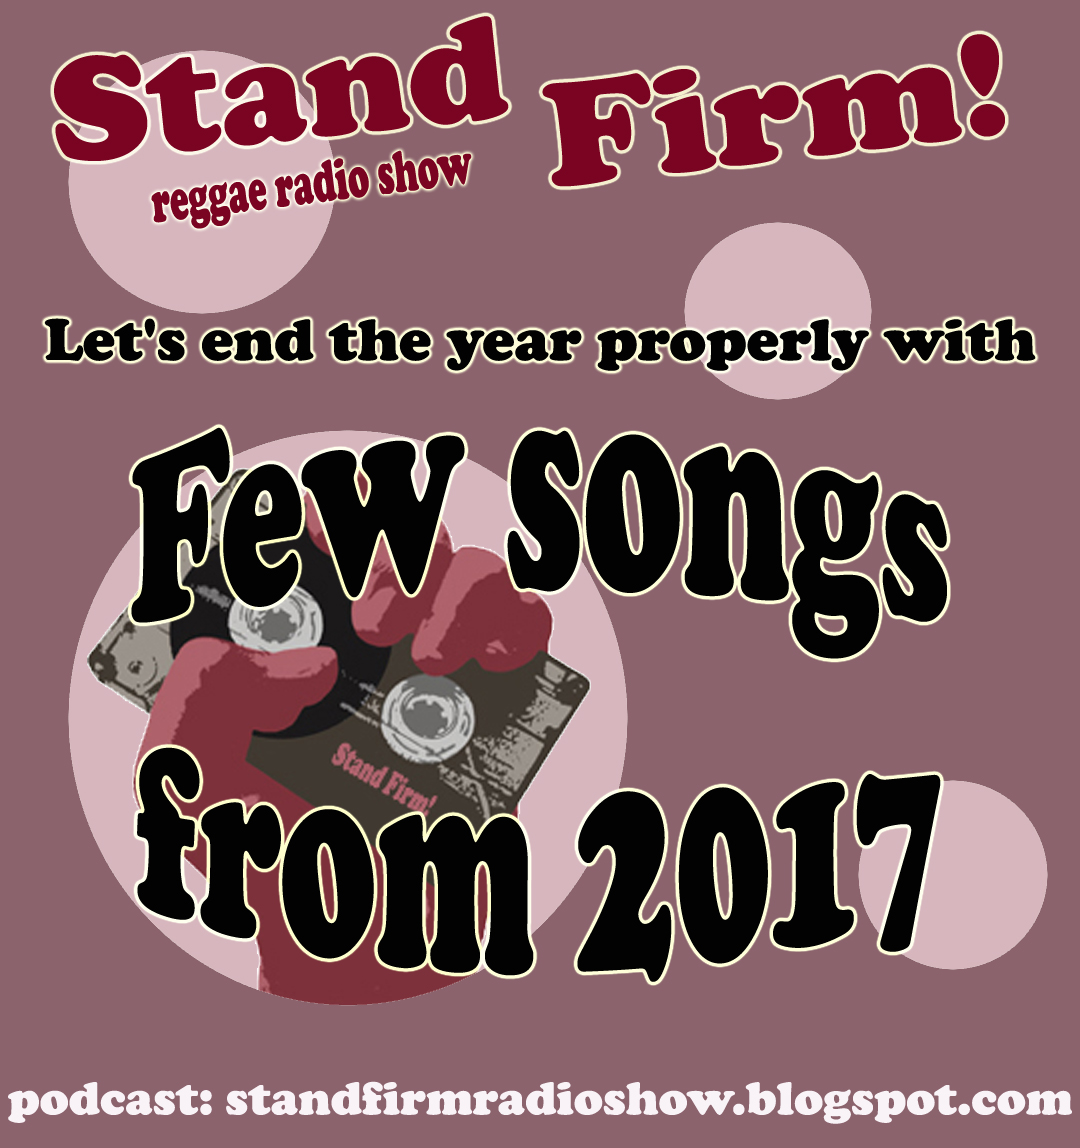 Stand Firm! 31-12-17 (fb-blog)